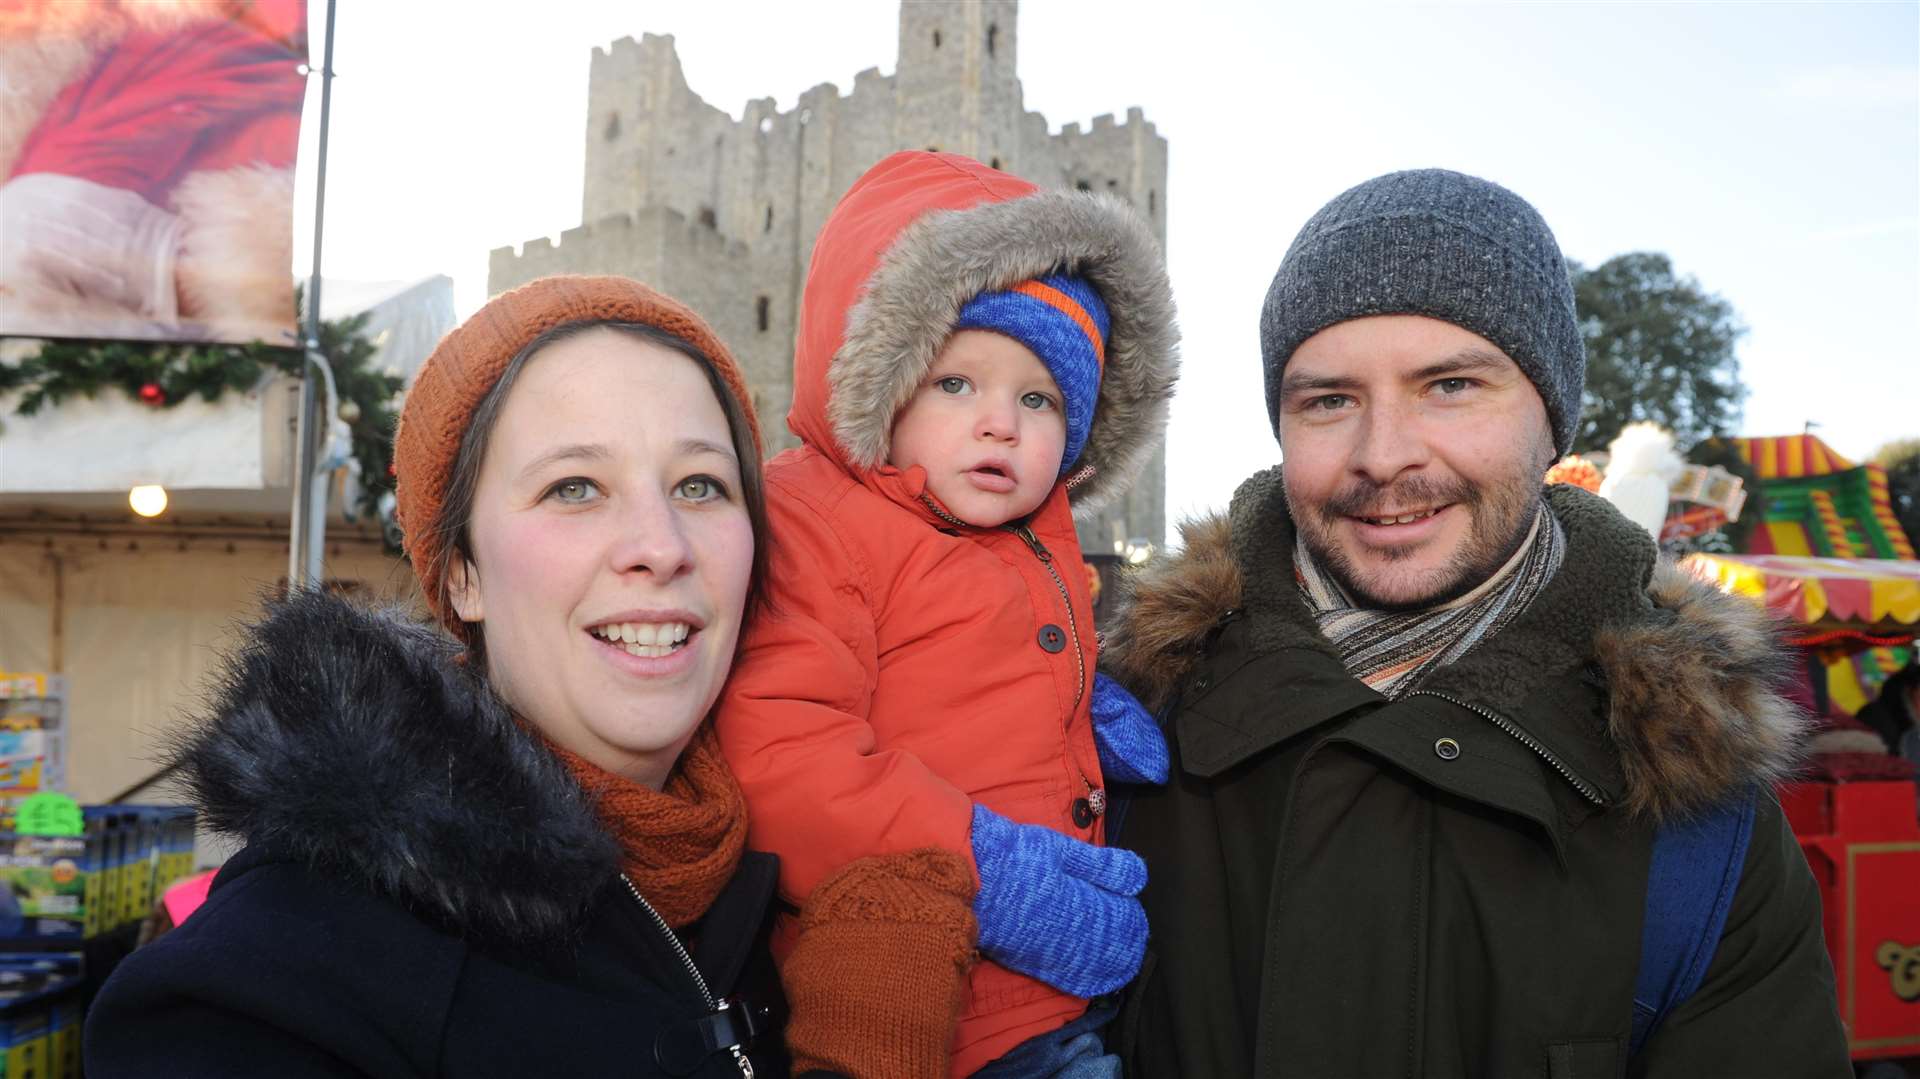 Kirsty, James and Rory at last year's Christmas market in Rochester Picture: Steve Crispe